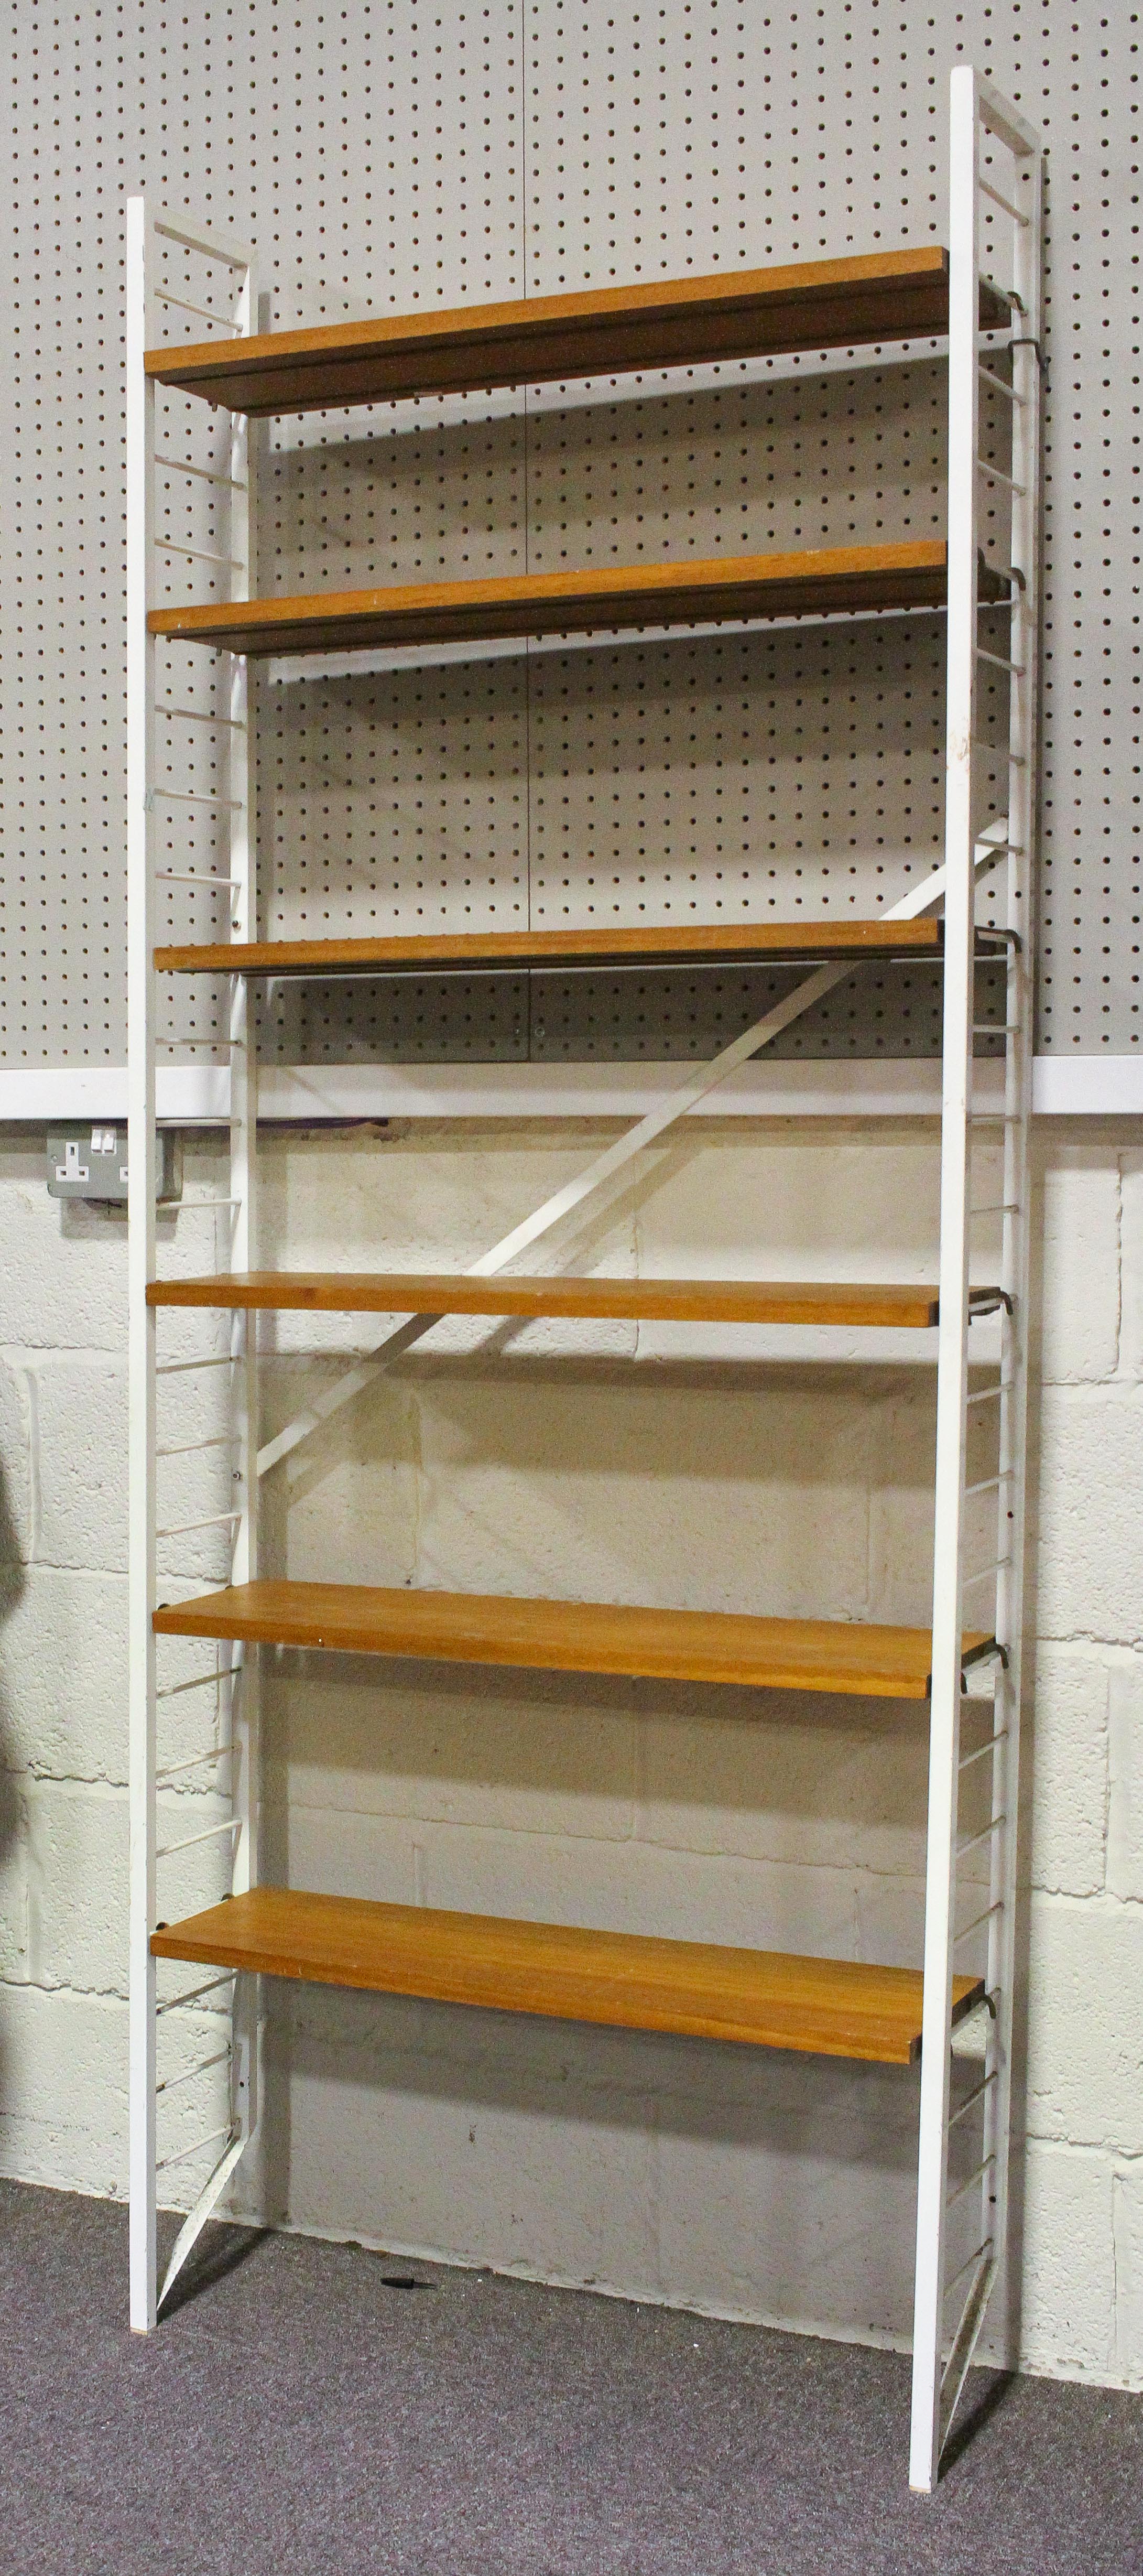 A set of Staples Ladderax shelving unit with white ladder supports and six teak shelves,